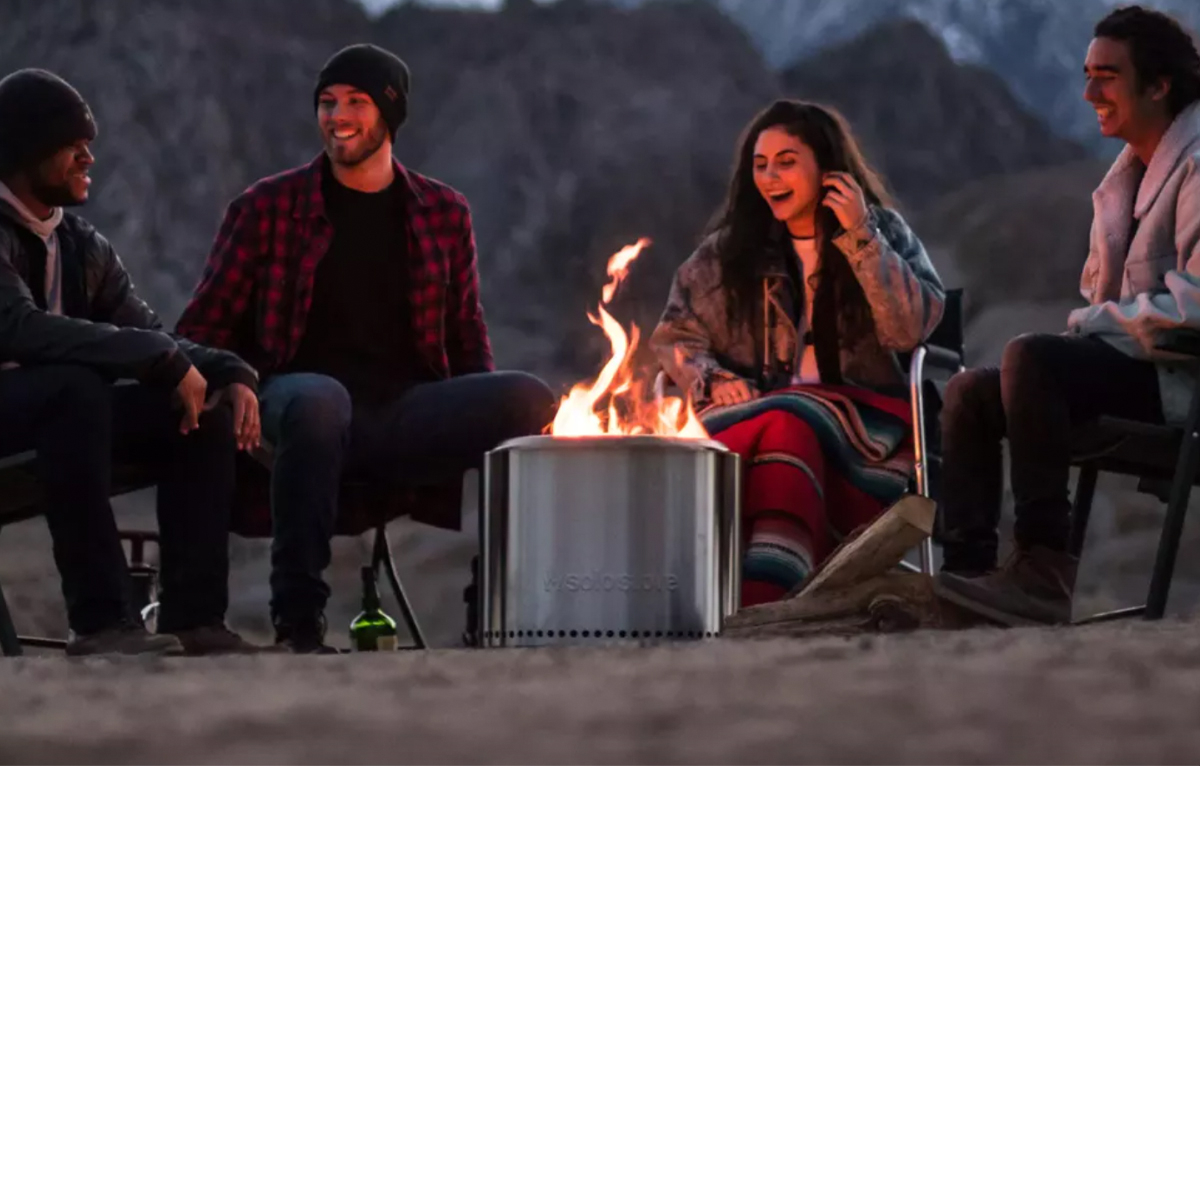 Solo Stove Sale: Shop Portable, Fire Pits With 16,200+ 5-Star Reviews